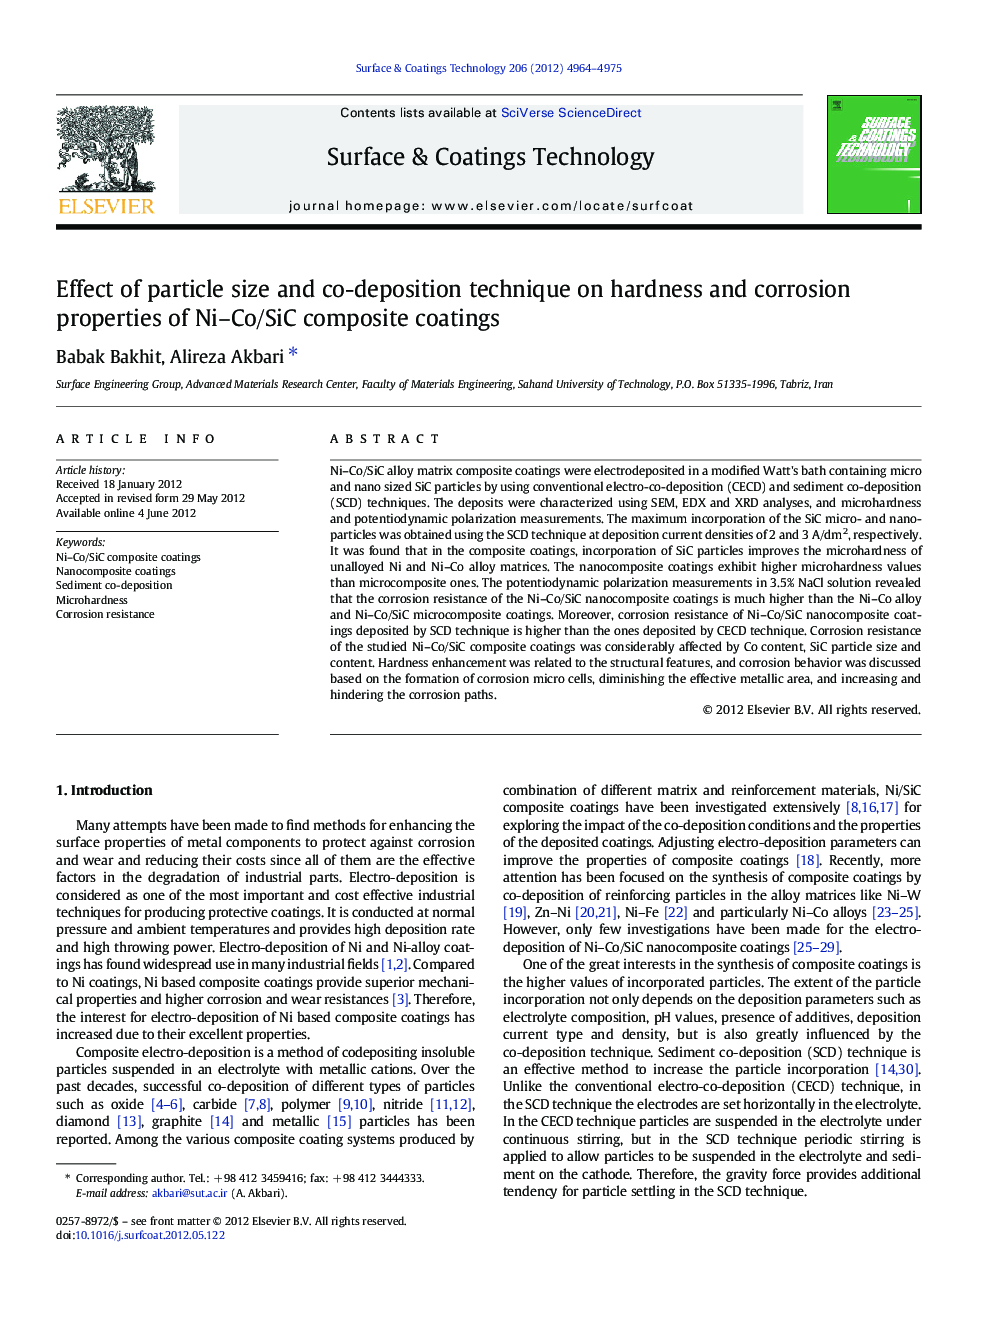 Effect of particle size and co-deposition technique on hardness and corrosion properties of Ni-Co/SiC composite coatings